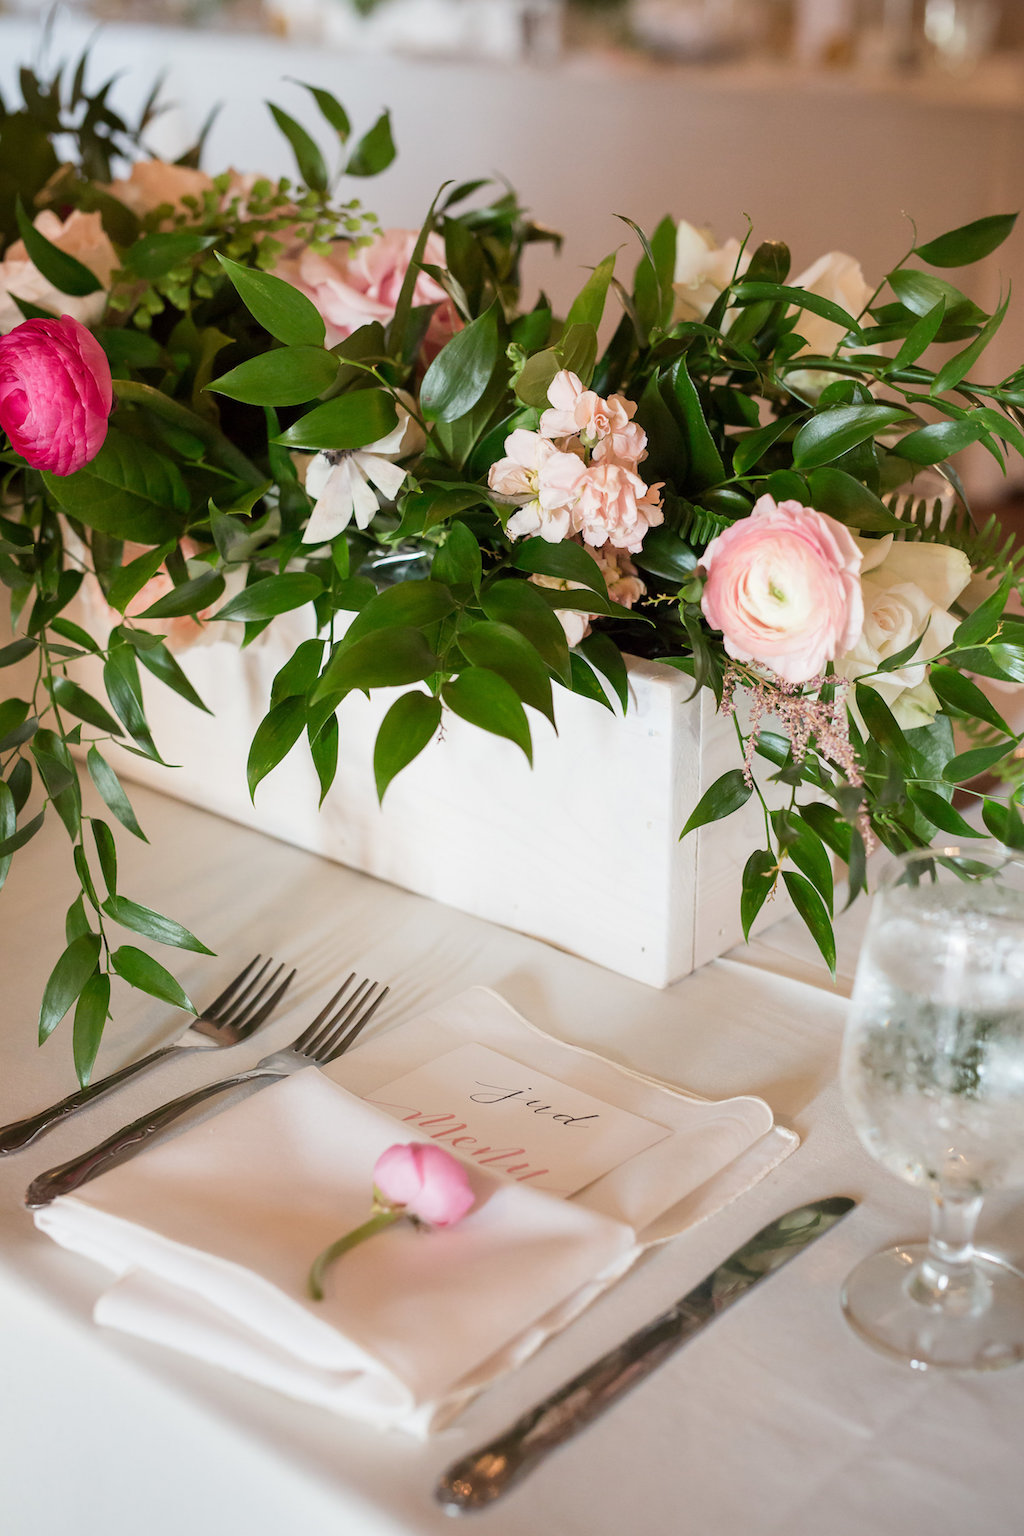 Elegant Wedding Reception Decor, Low Wooden Planter Box with Blush Pink, Pink and Greenery Florals, White Linen with Pink Flower | Sarasota Wedding Photographer Cat Pennenga Photography